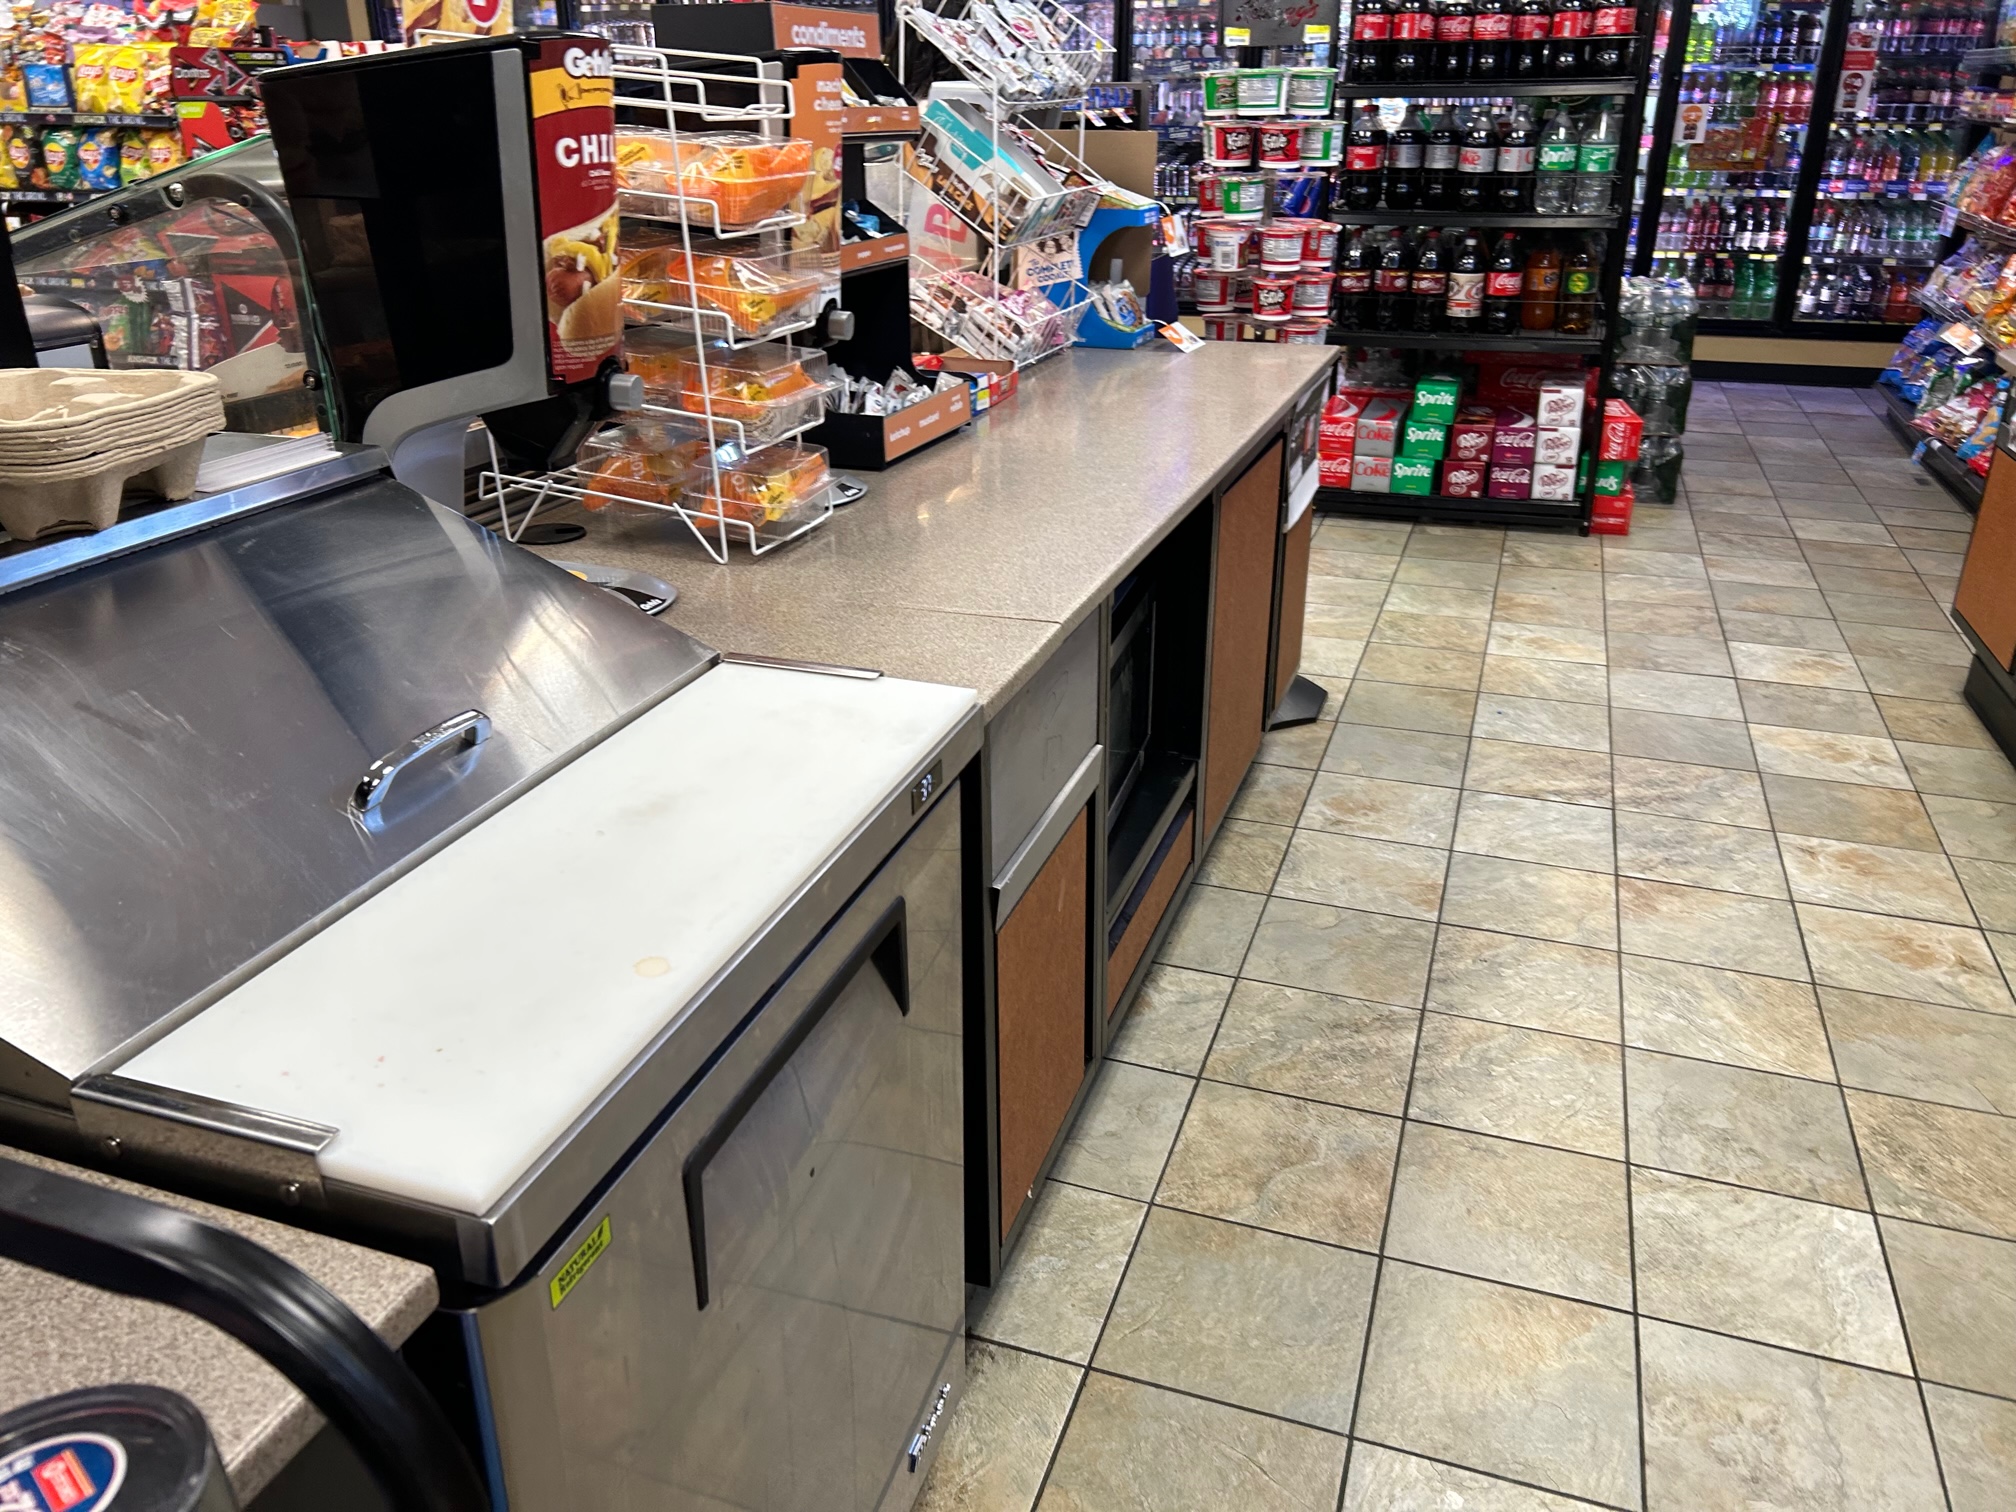 C- Store and Grocery Business for sale in NJ